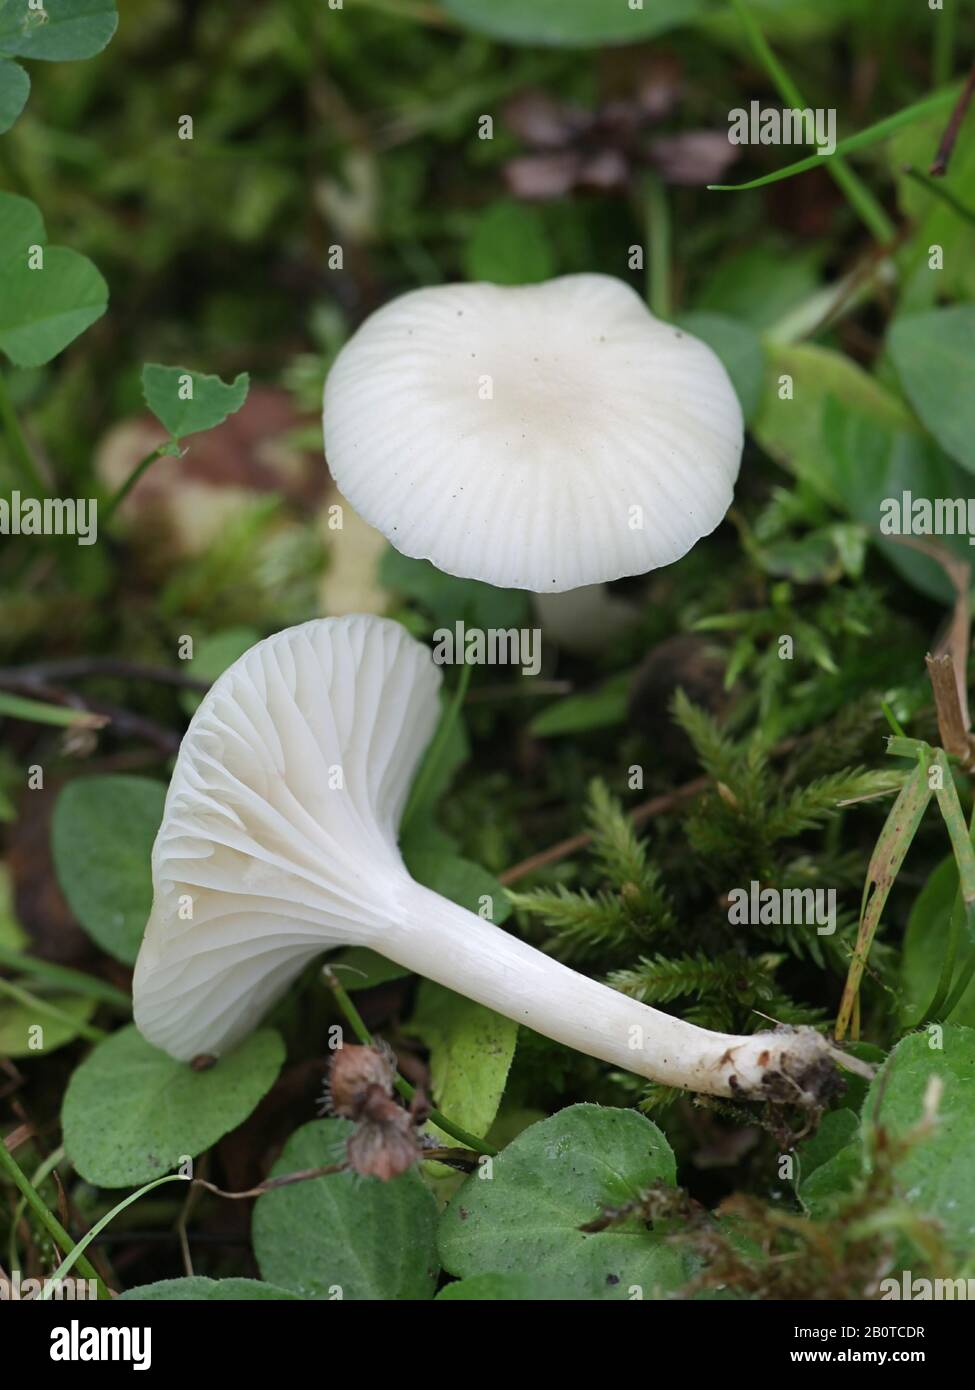 Cuphophyllus virgineus, known as the snowy waxcap, wild mushrooms from Finlands Stock Photo